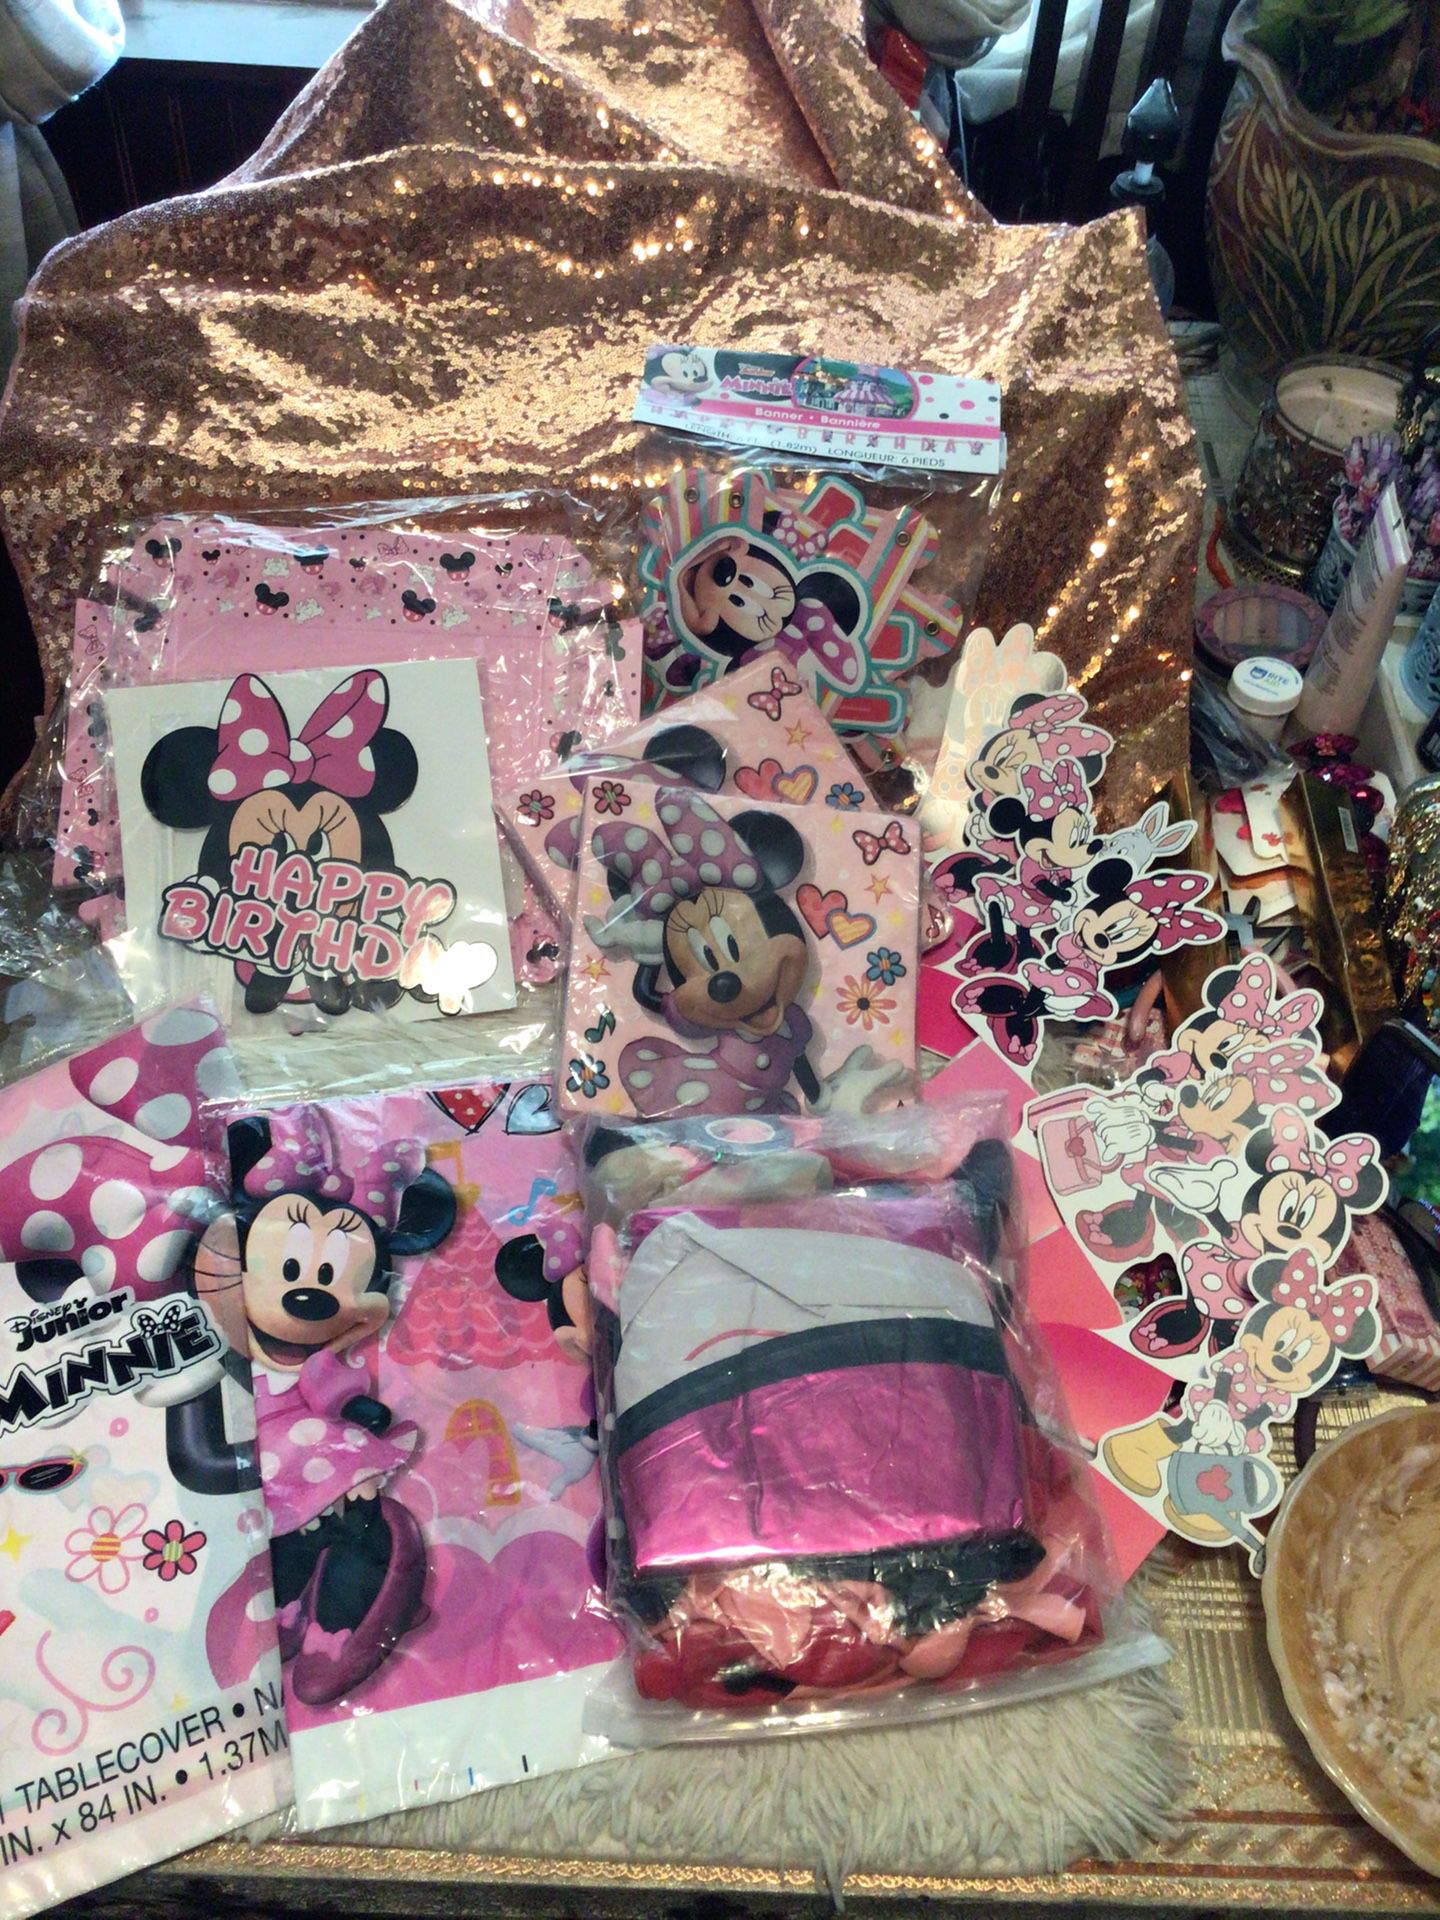 Minnie Bundle Comes With Balloon Garland Backdrop And Trays And Lots Of More Stuff…